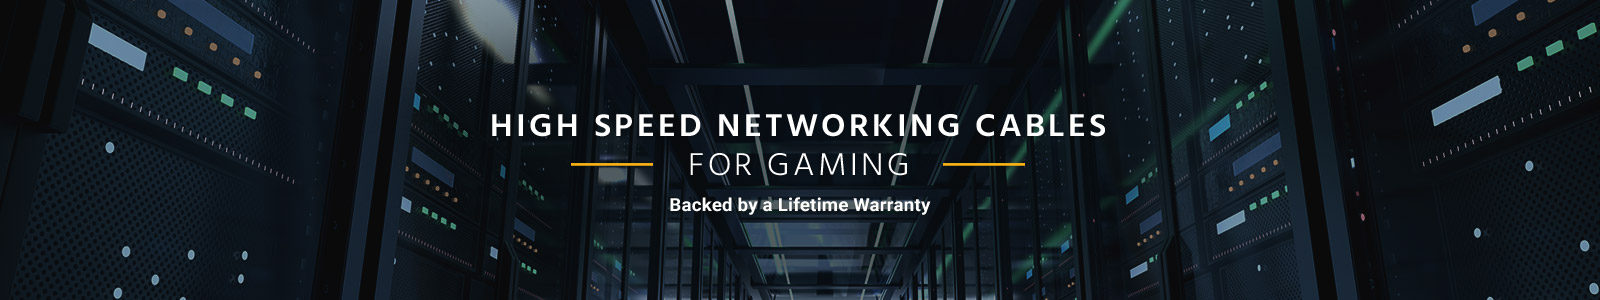 High Speed Networking Cables
For Gaming
Backed by a Lifetime Warranty
Shop Now